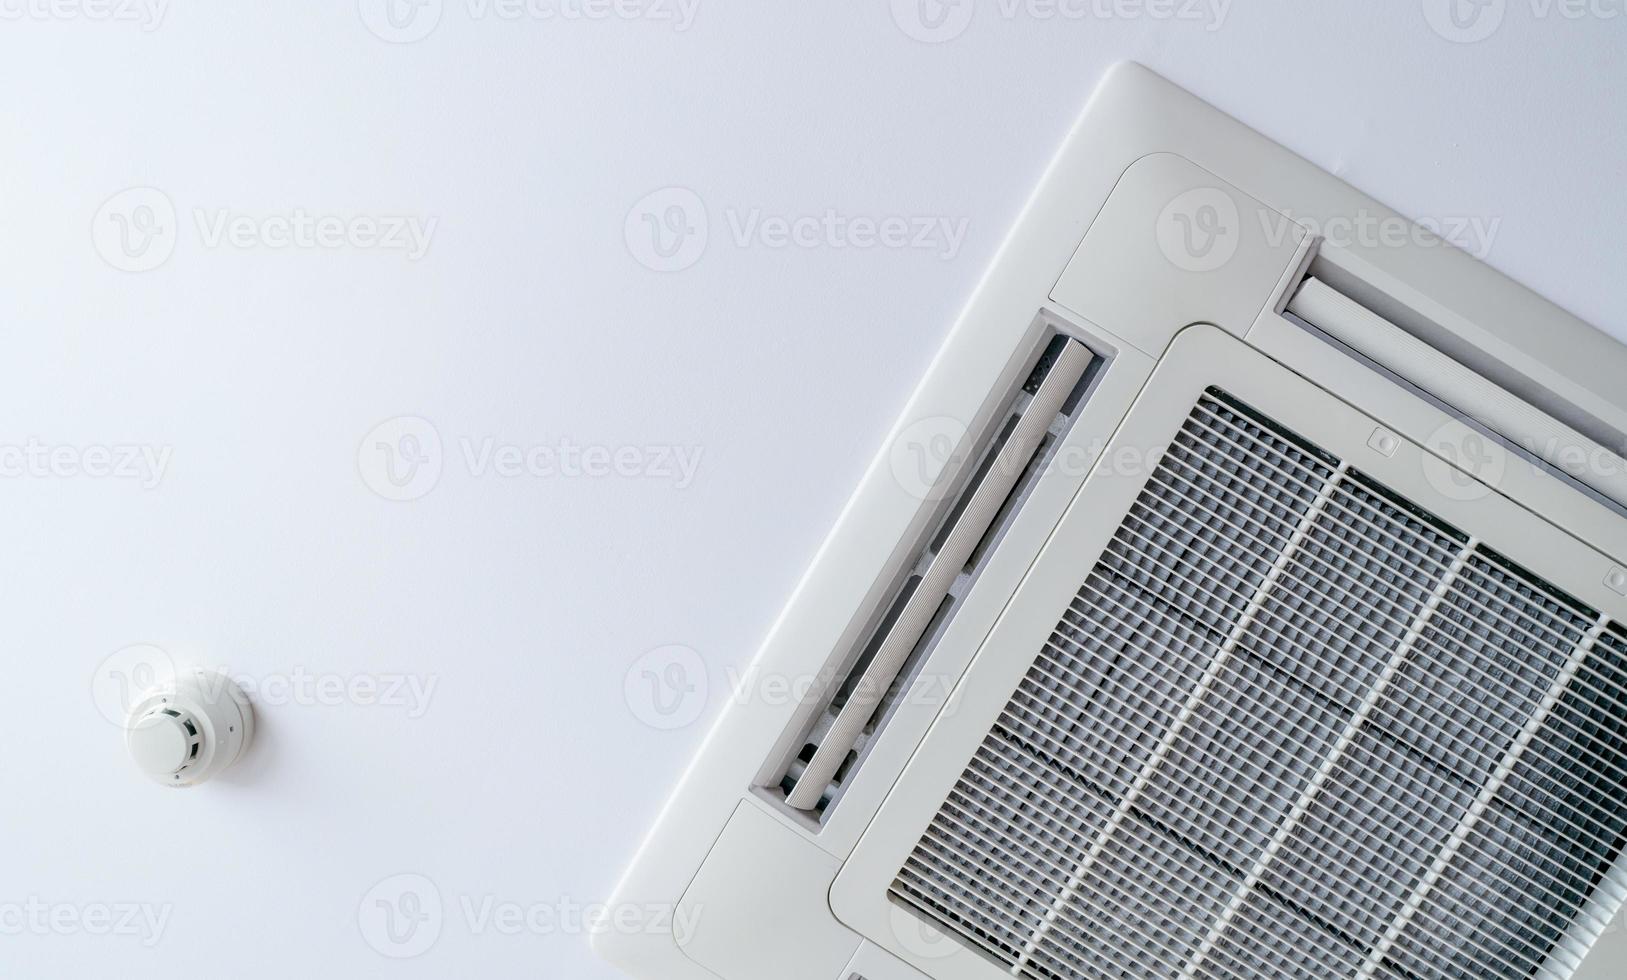 Cassette type air conditioner and smoke detector mounted on ceiling wall. Air duct on ceiling in hotel. Air heading unit on gypsum wall. Cool system in the building. Air flow and ventilation system. photo